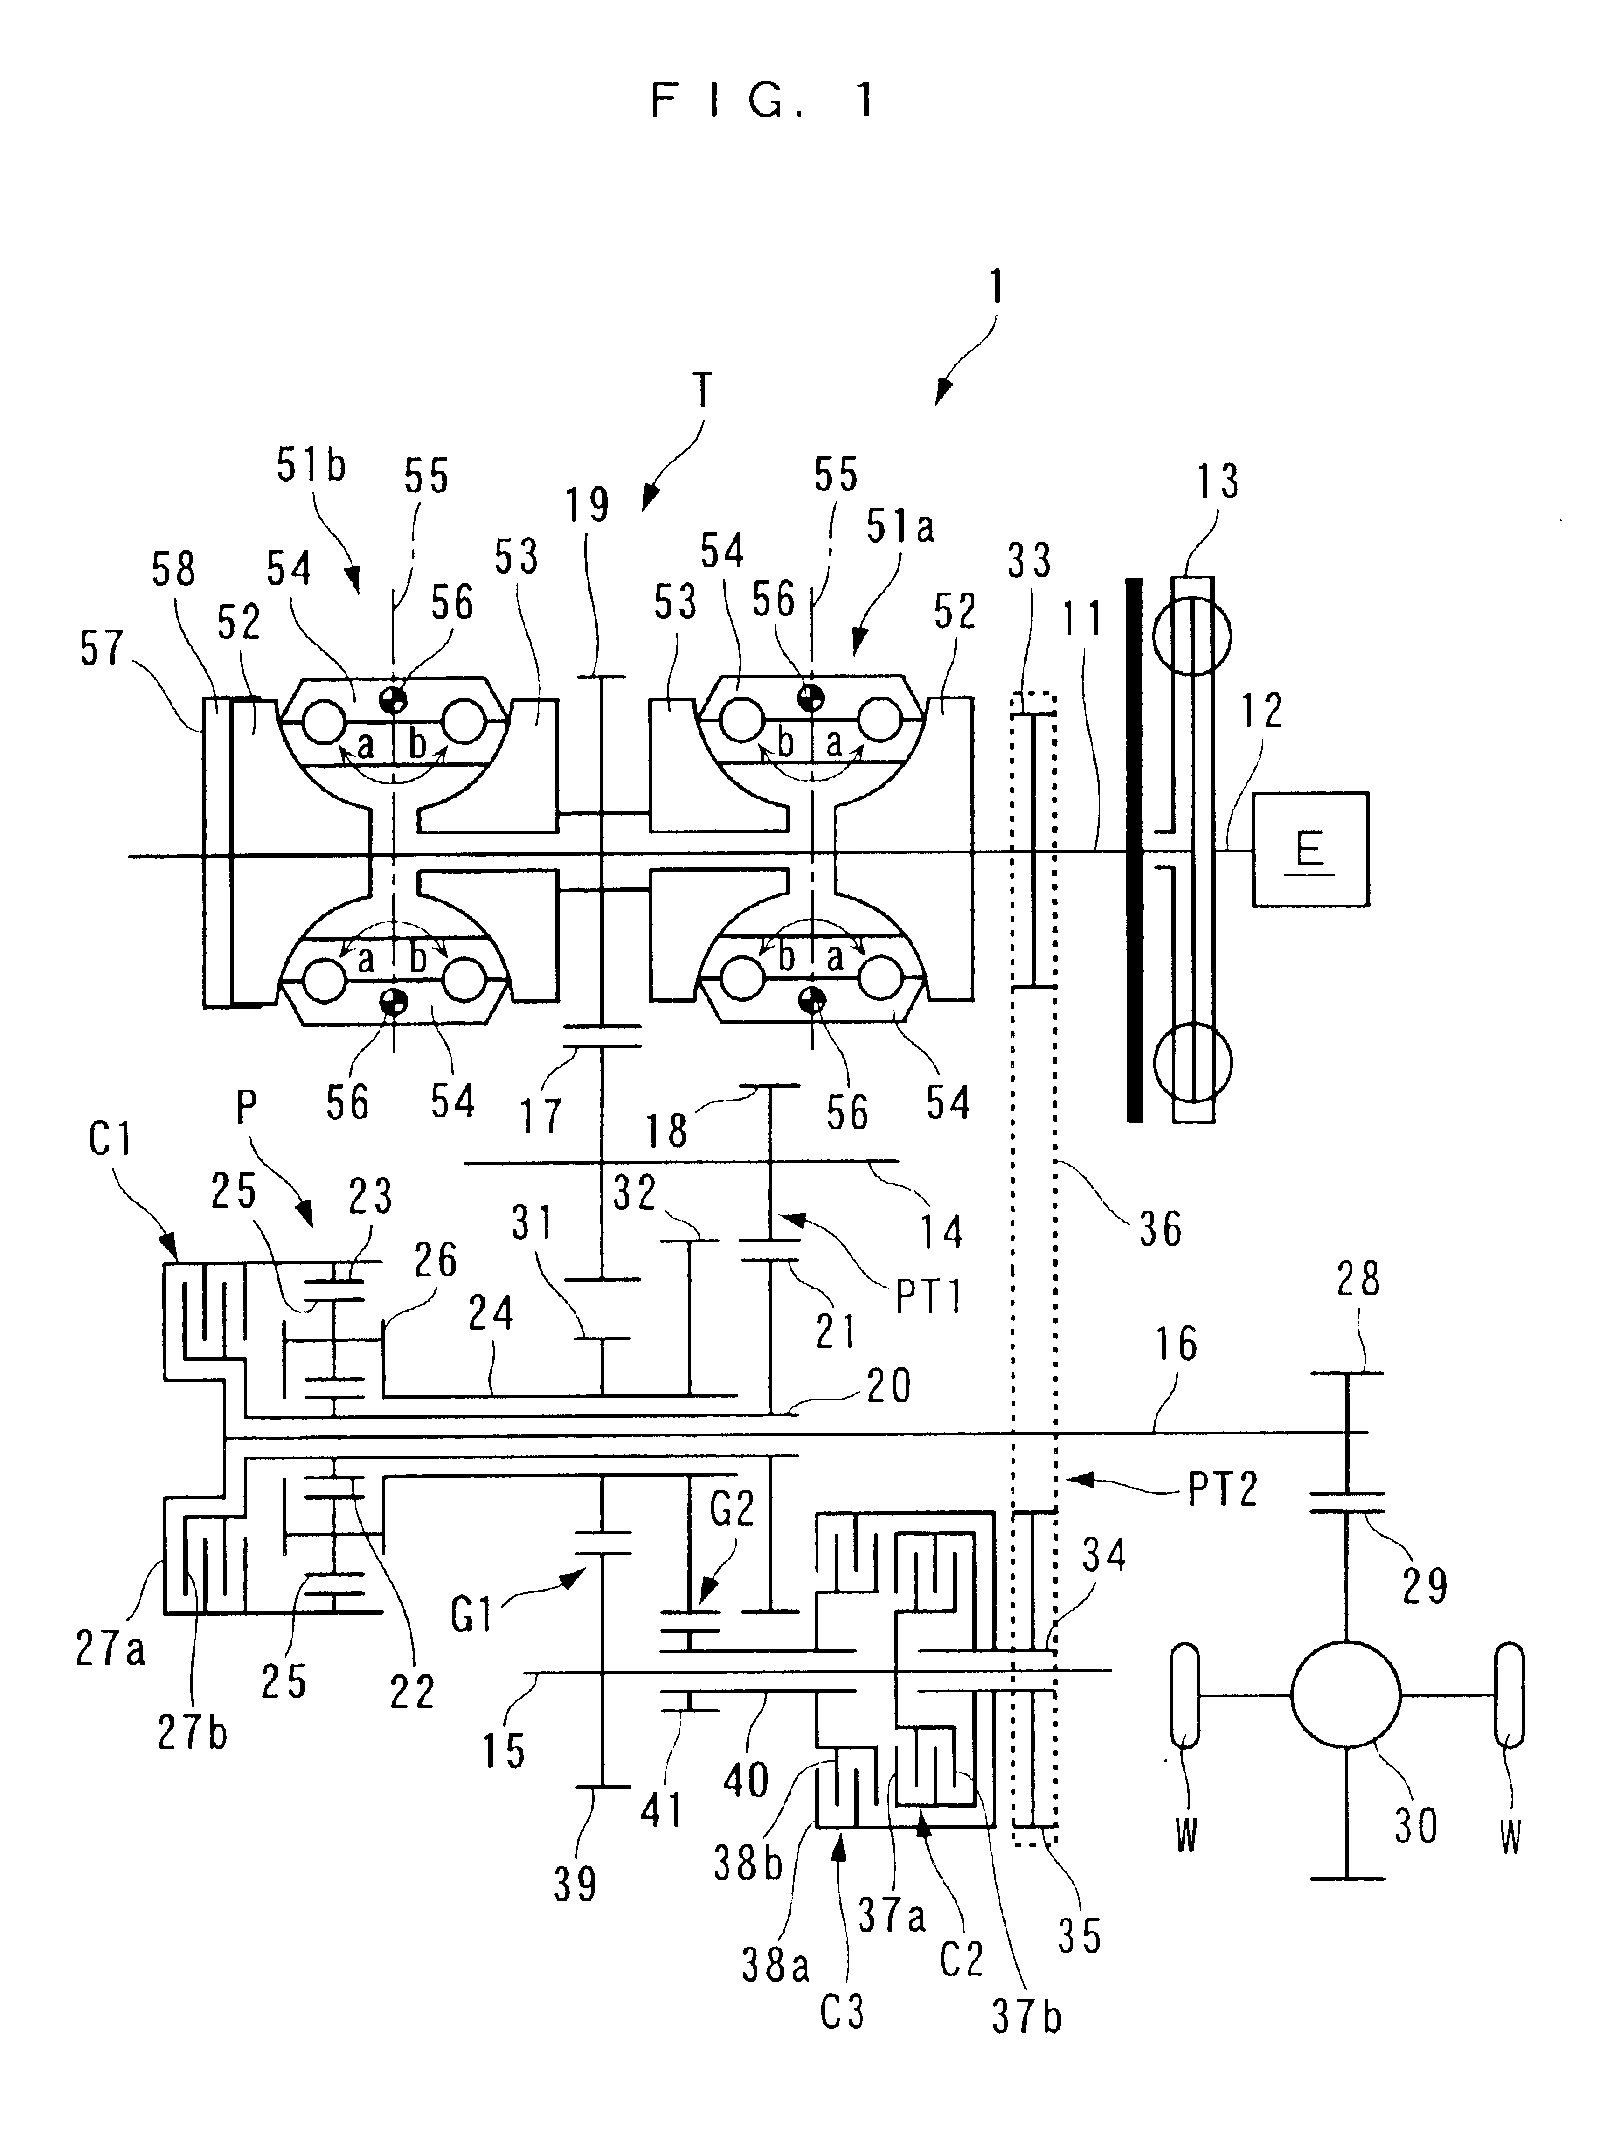 Continuously variable transmission system for vehicles